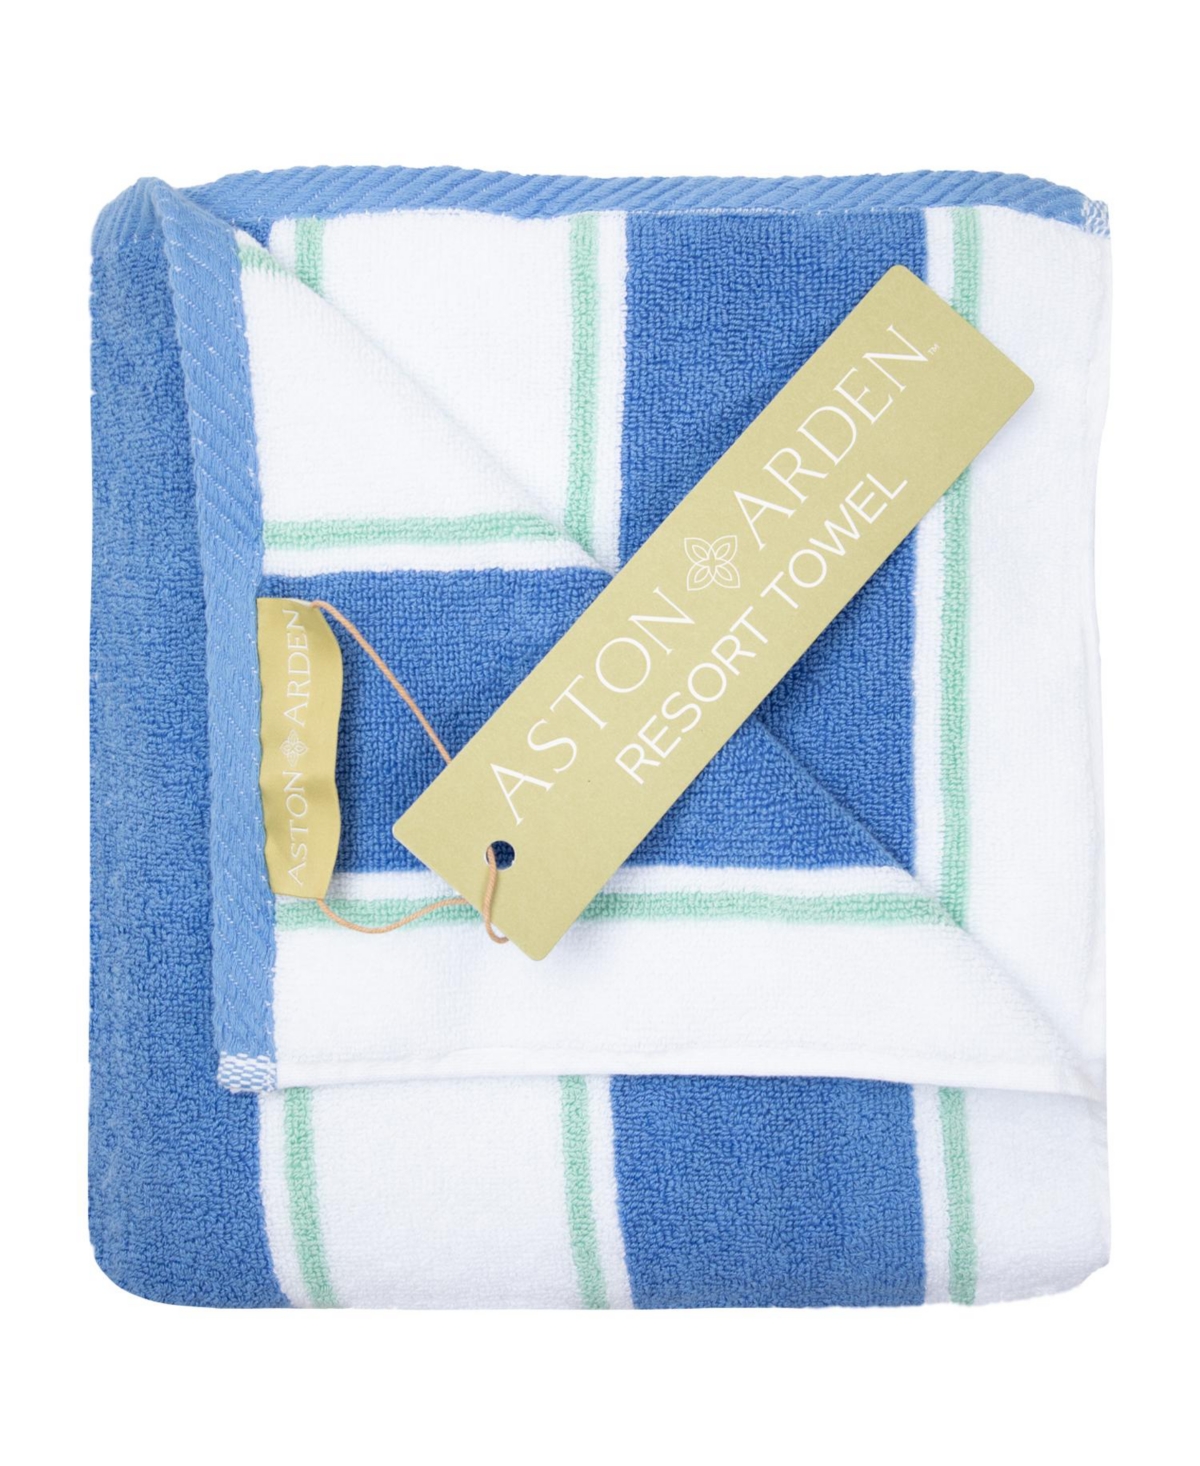 Aston And Arden Oversized Extra Thick Luxury Beach Towel (35x70 In., 600 Gsm), Pinstriped, Soft Ring Spun Cotton Res In Blue/green